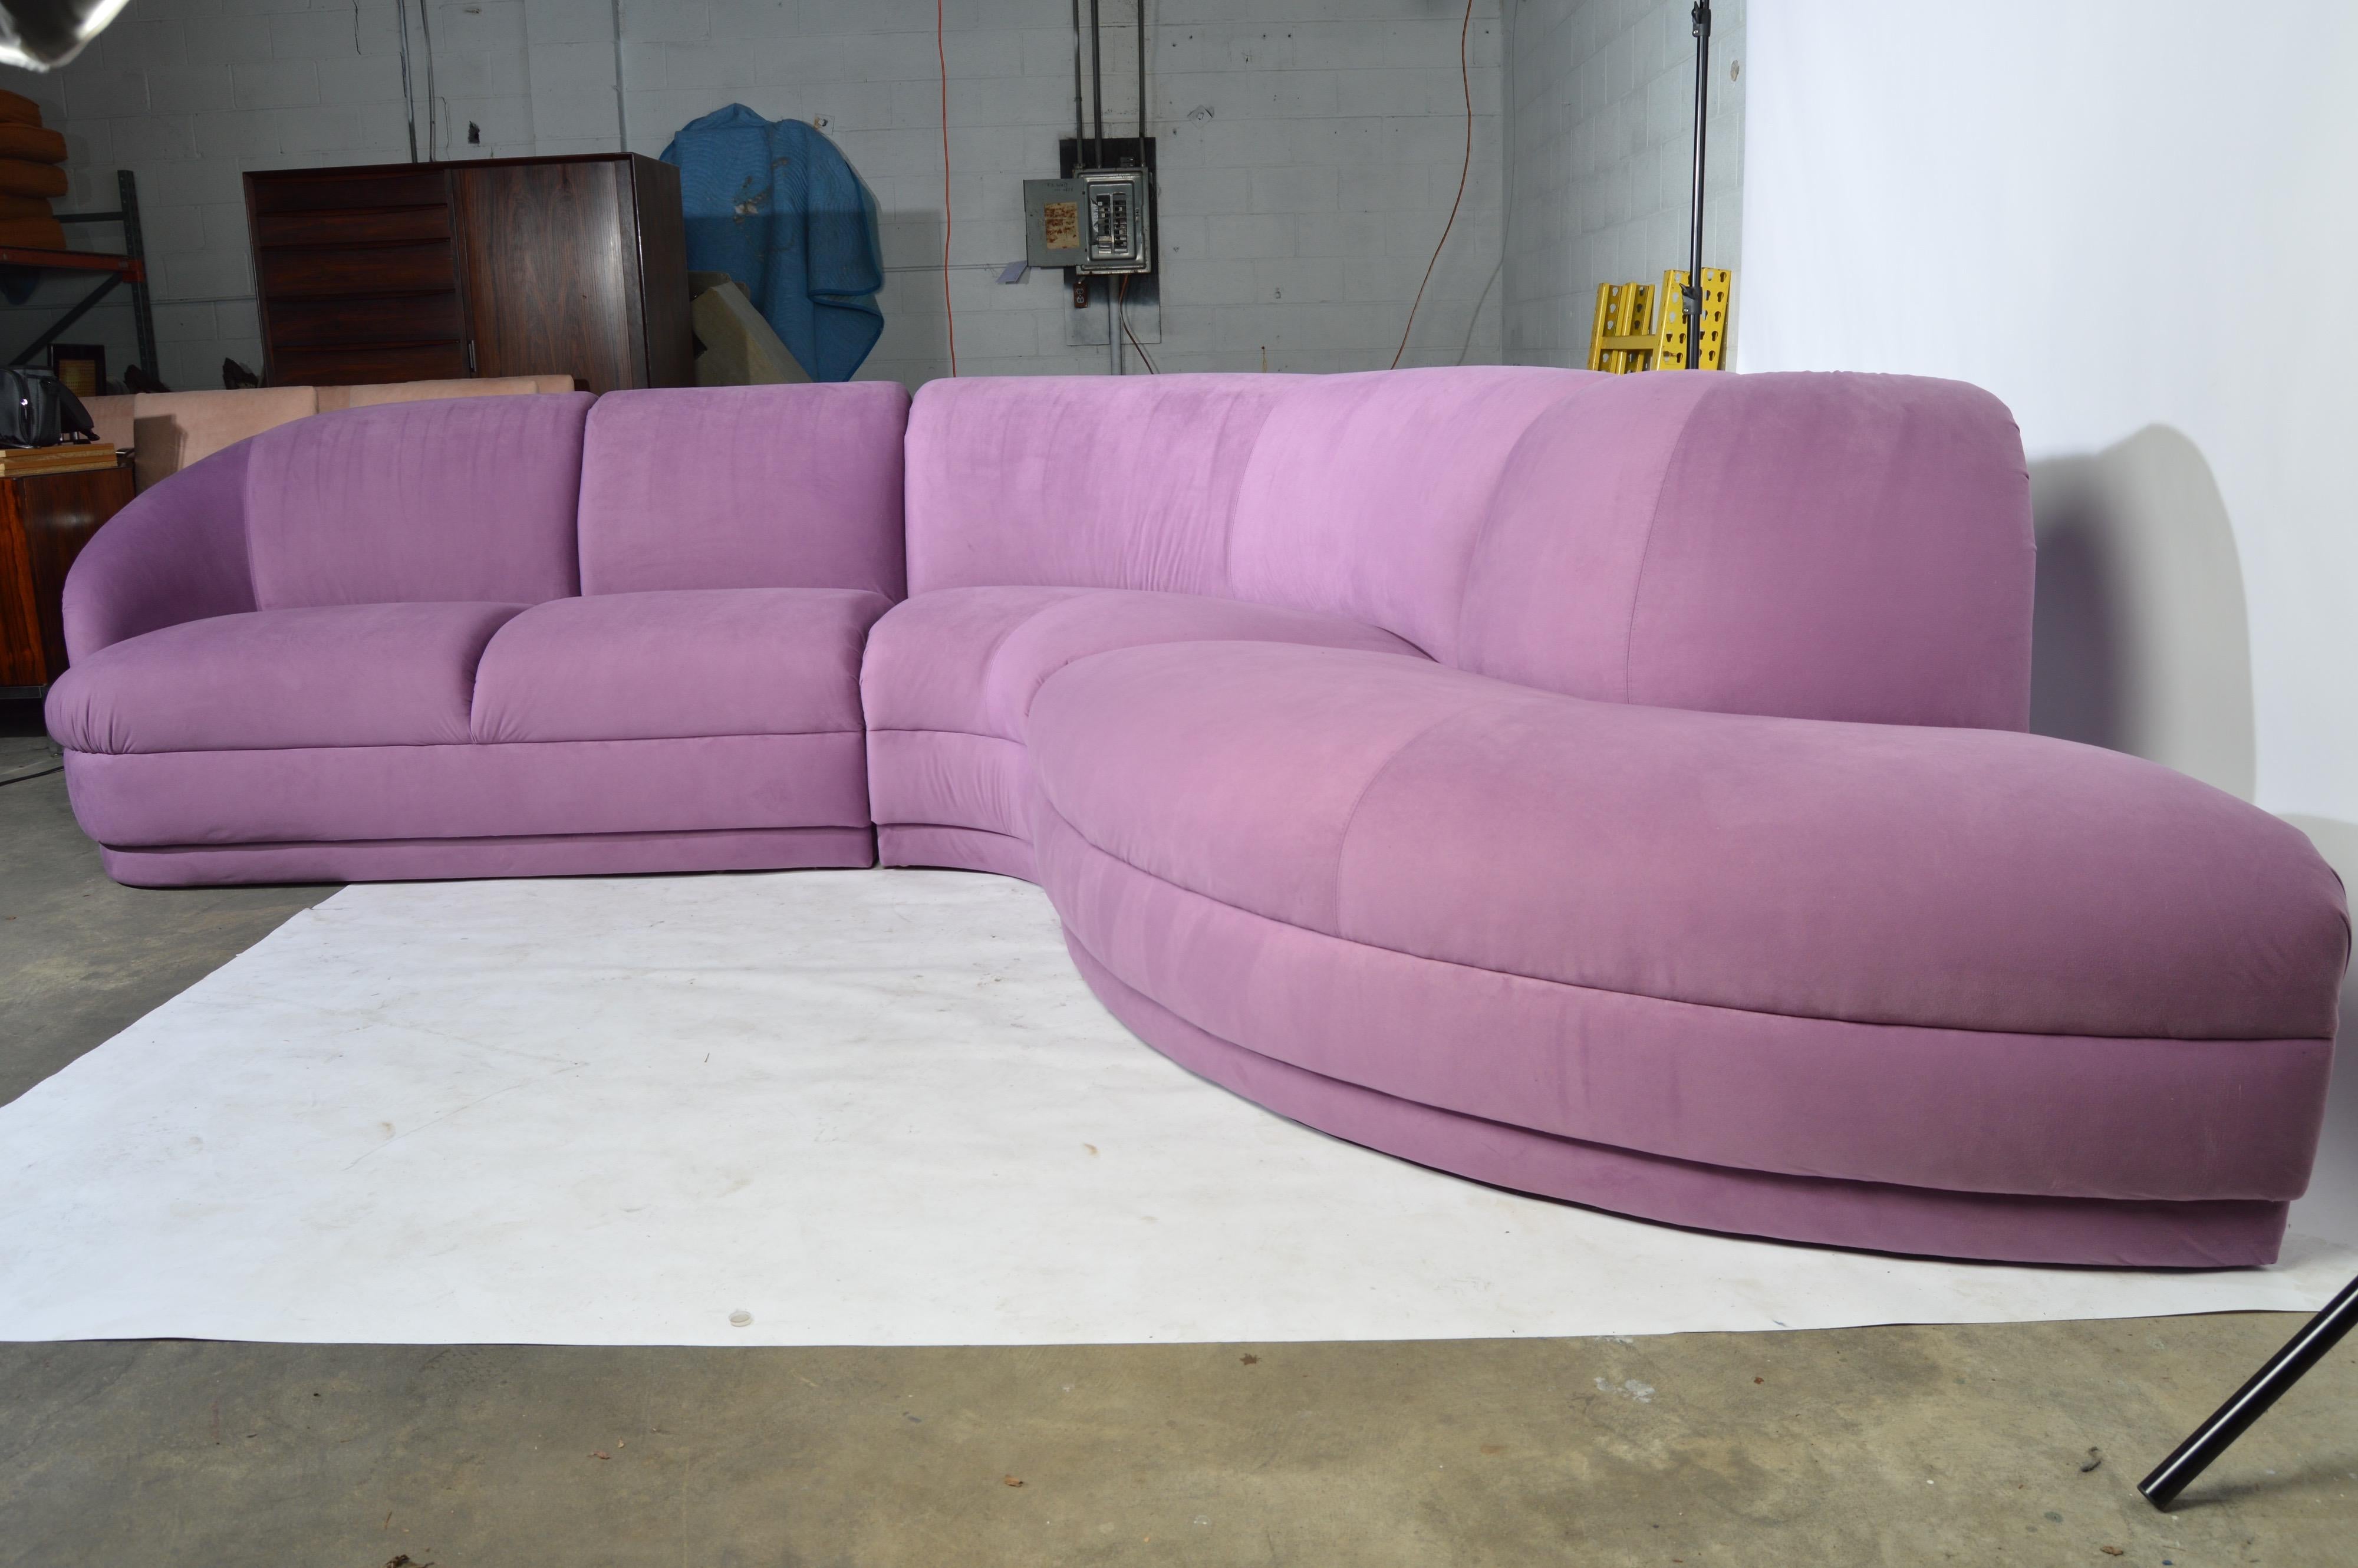 A stunning 3 piece serpentine sectional sofa designed by Milo Baughman having plum microsuede upholstery that has been professionally cleaned.
Manufactured in the 1980s. Solid construction with buoyant cushions. This sofa sat in the “Piano